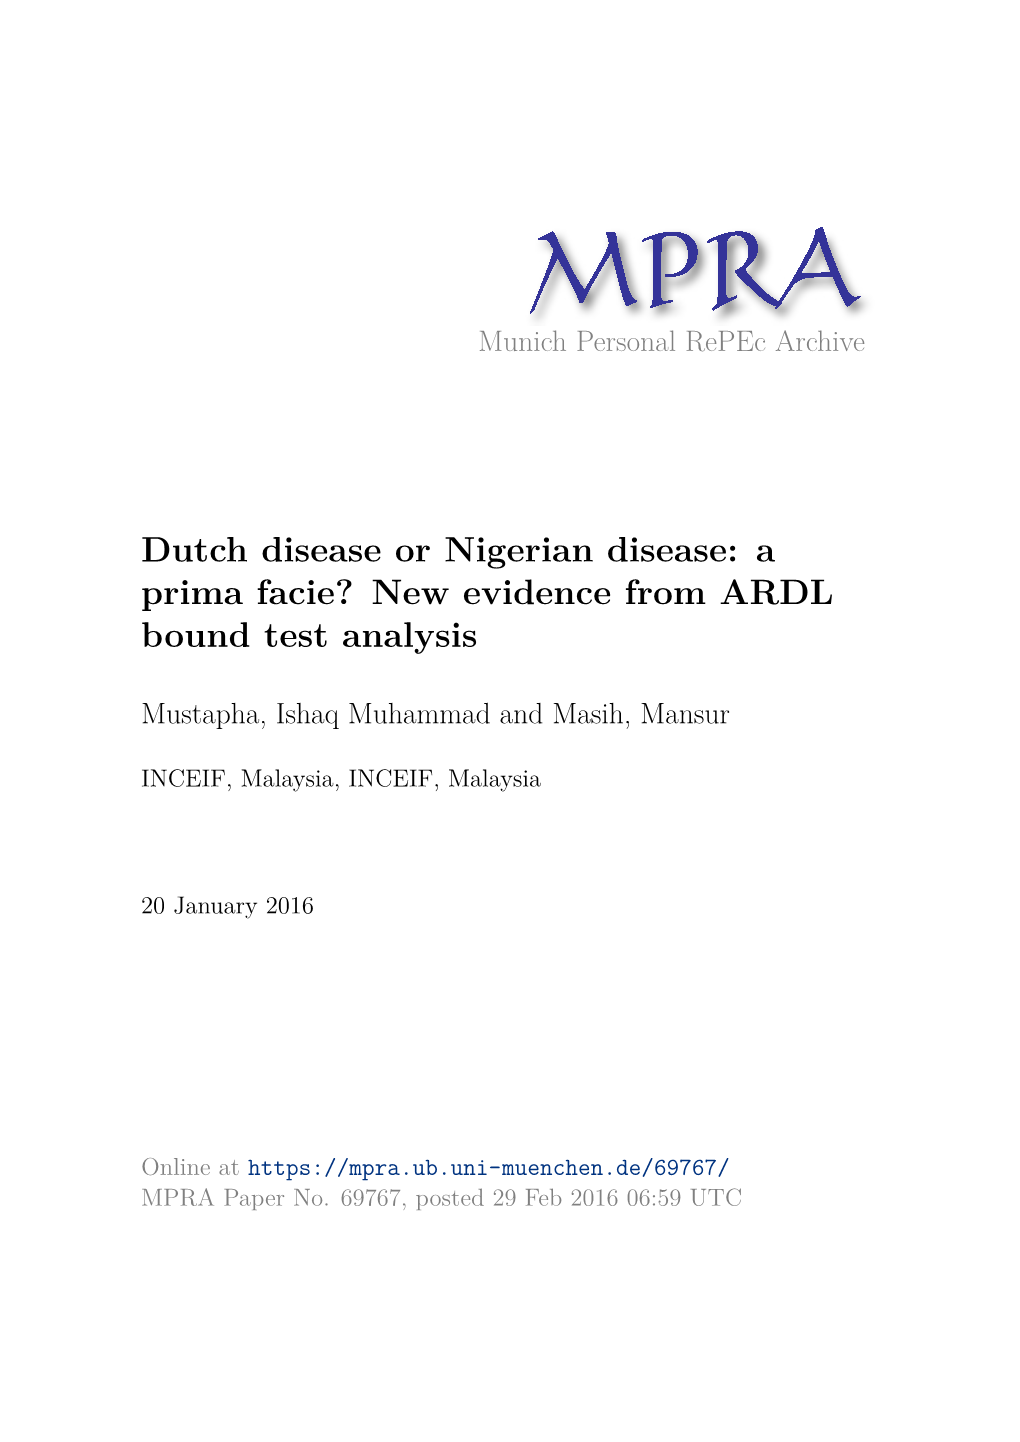 Dutch Disease Or Nigerian Disease: a Prima Facie? New Evidence from ARDL Bound Test Analysis